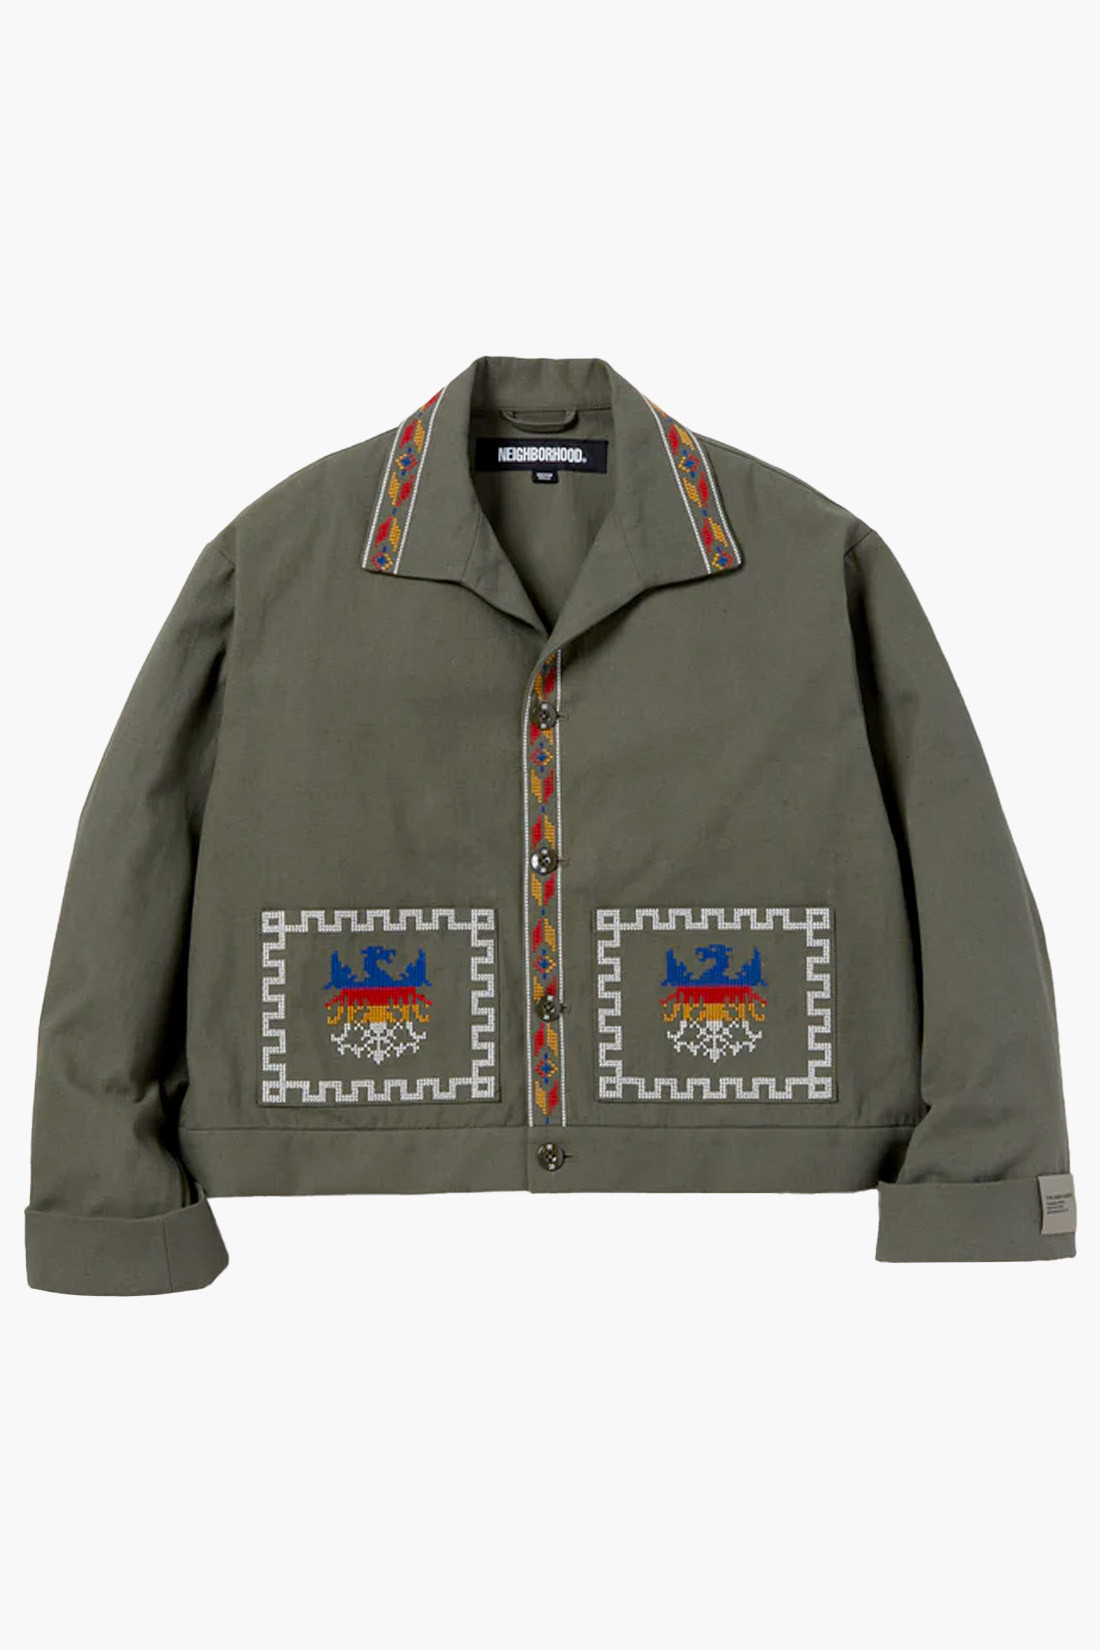 Gt embroidery jacket Olive drab